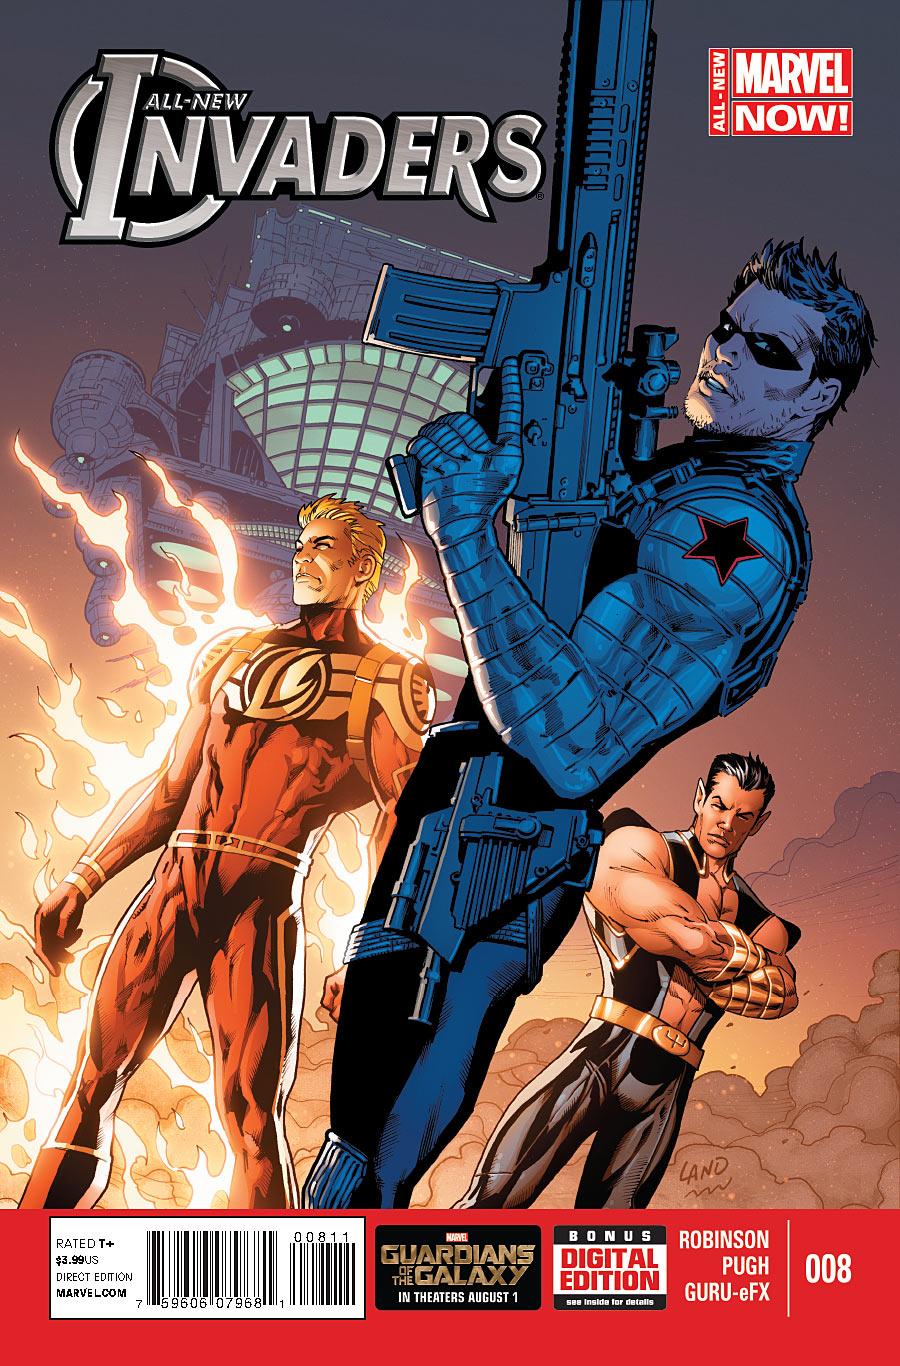 All-New Invaders Vol. 1 #8